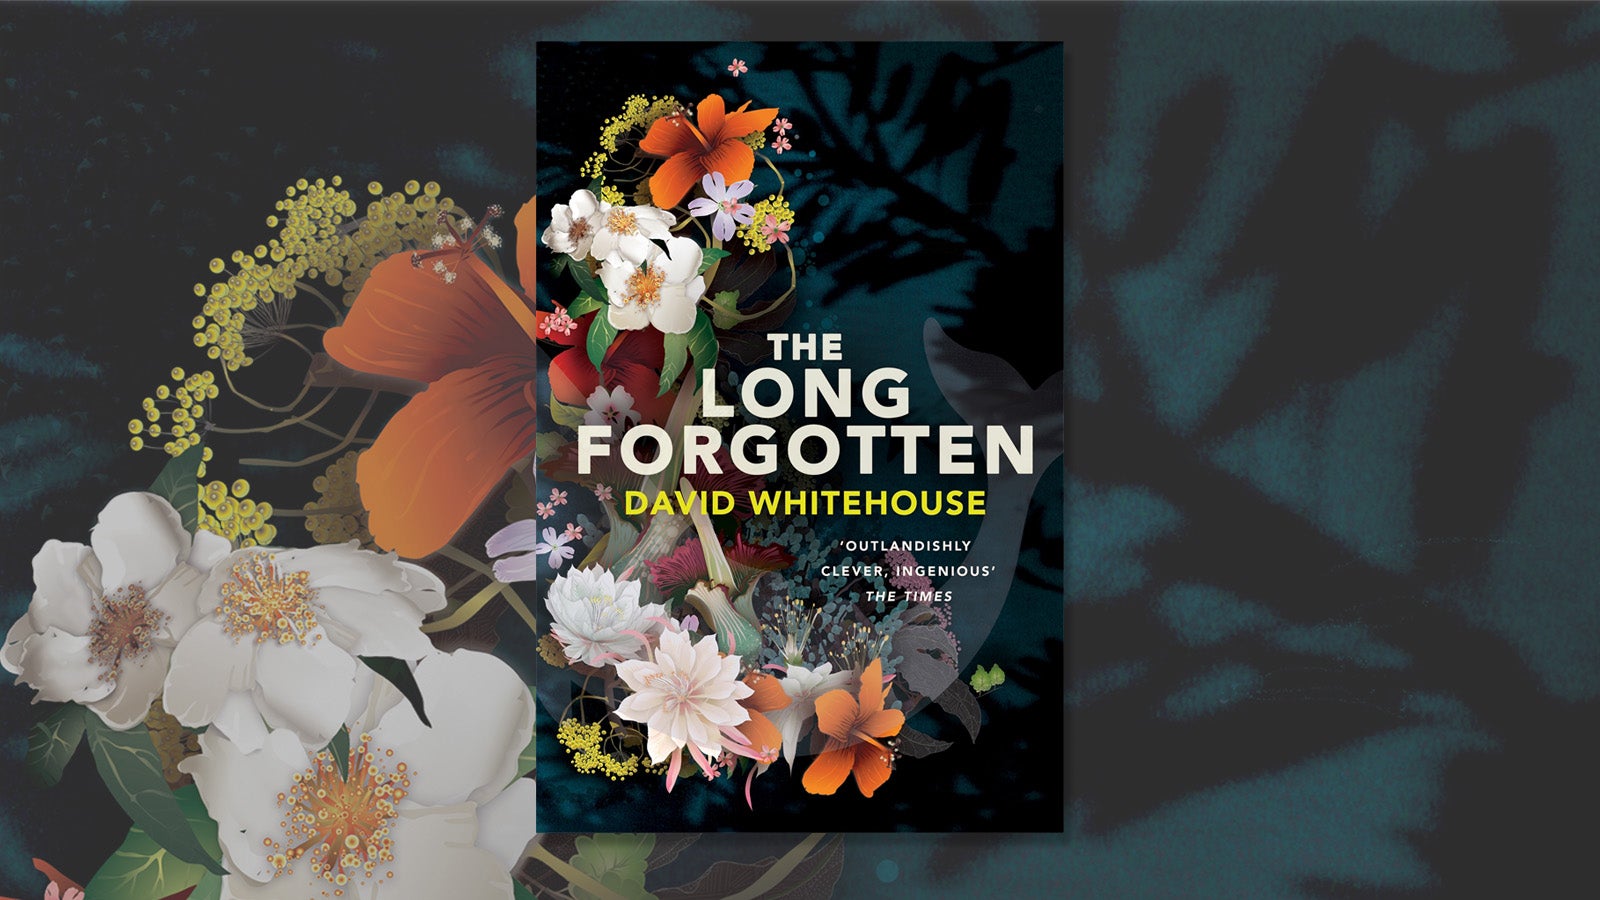 The jacket cover for the book the Long Forgotten by David Whitehouse, depicting orange and white flowers on a dark blue background